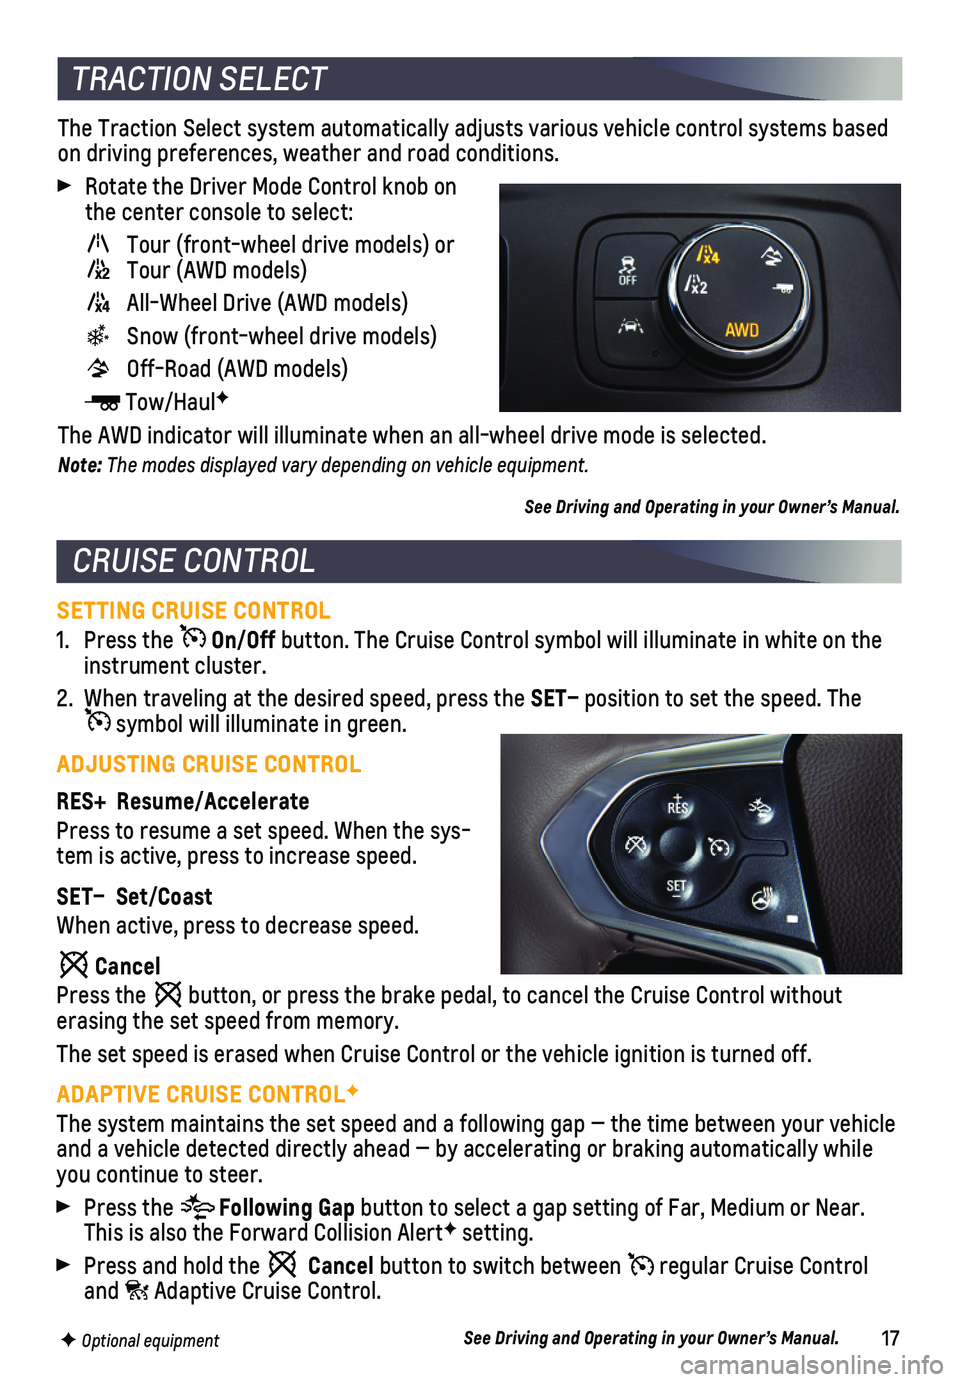 CHEVROLET TRAVERSE 2019  Get To Know Guide 17F Optional equipment
SETTING CRUISE CONTROL
1. Press the  On/Off button. The Cruise Control symbol will illuminate in white on the instrument cluster.
2. When traveling at the desired speed, press t